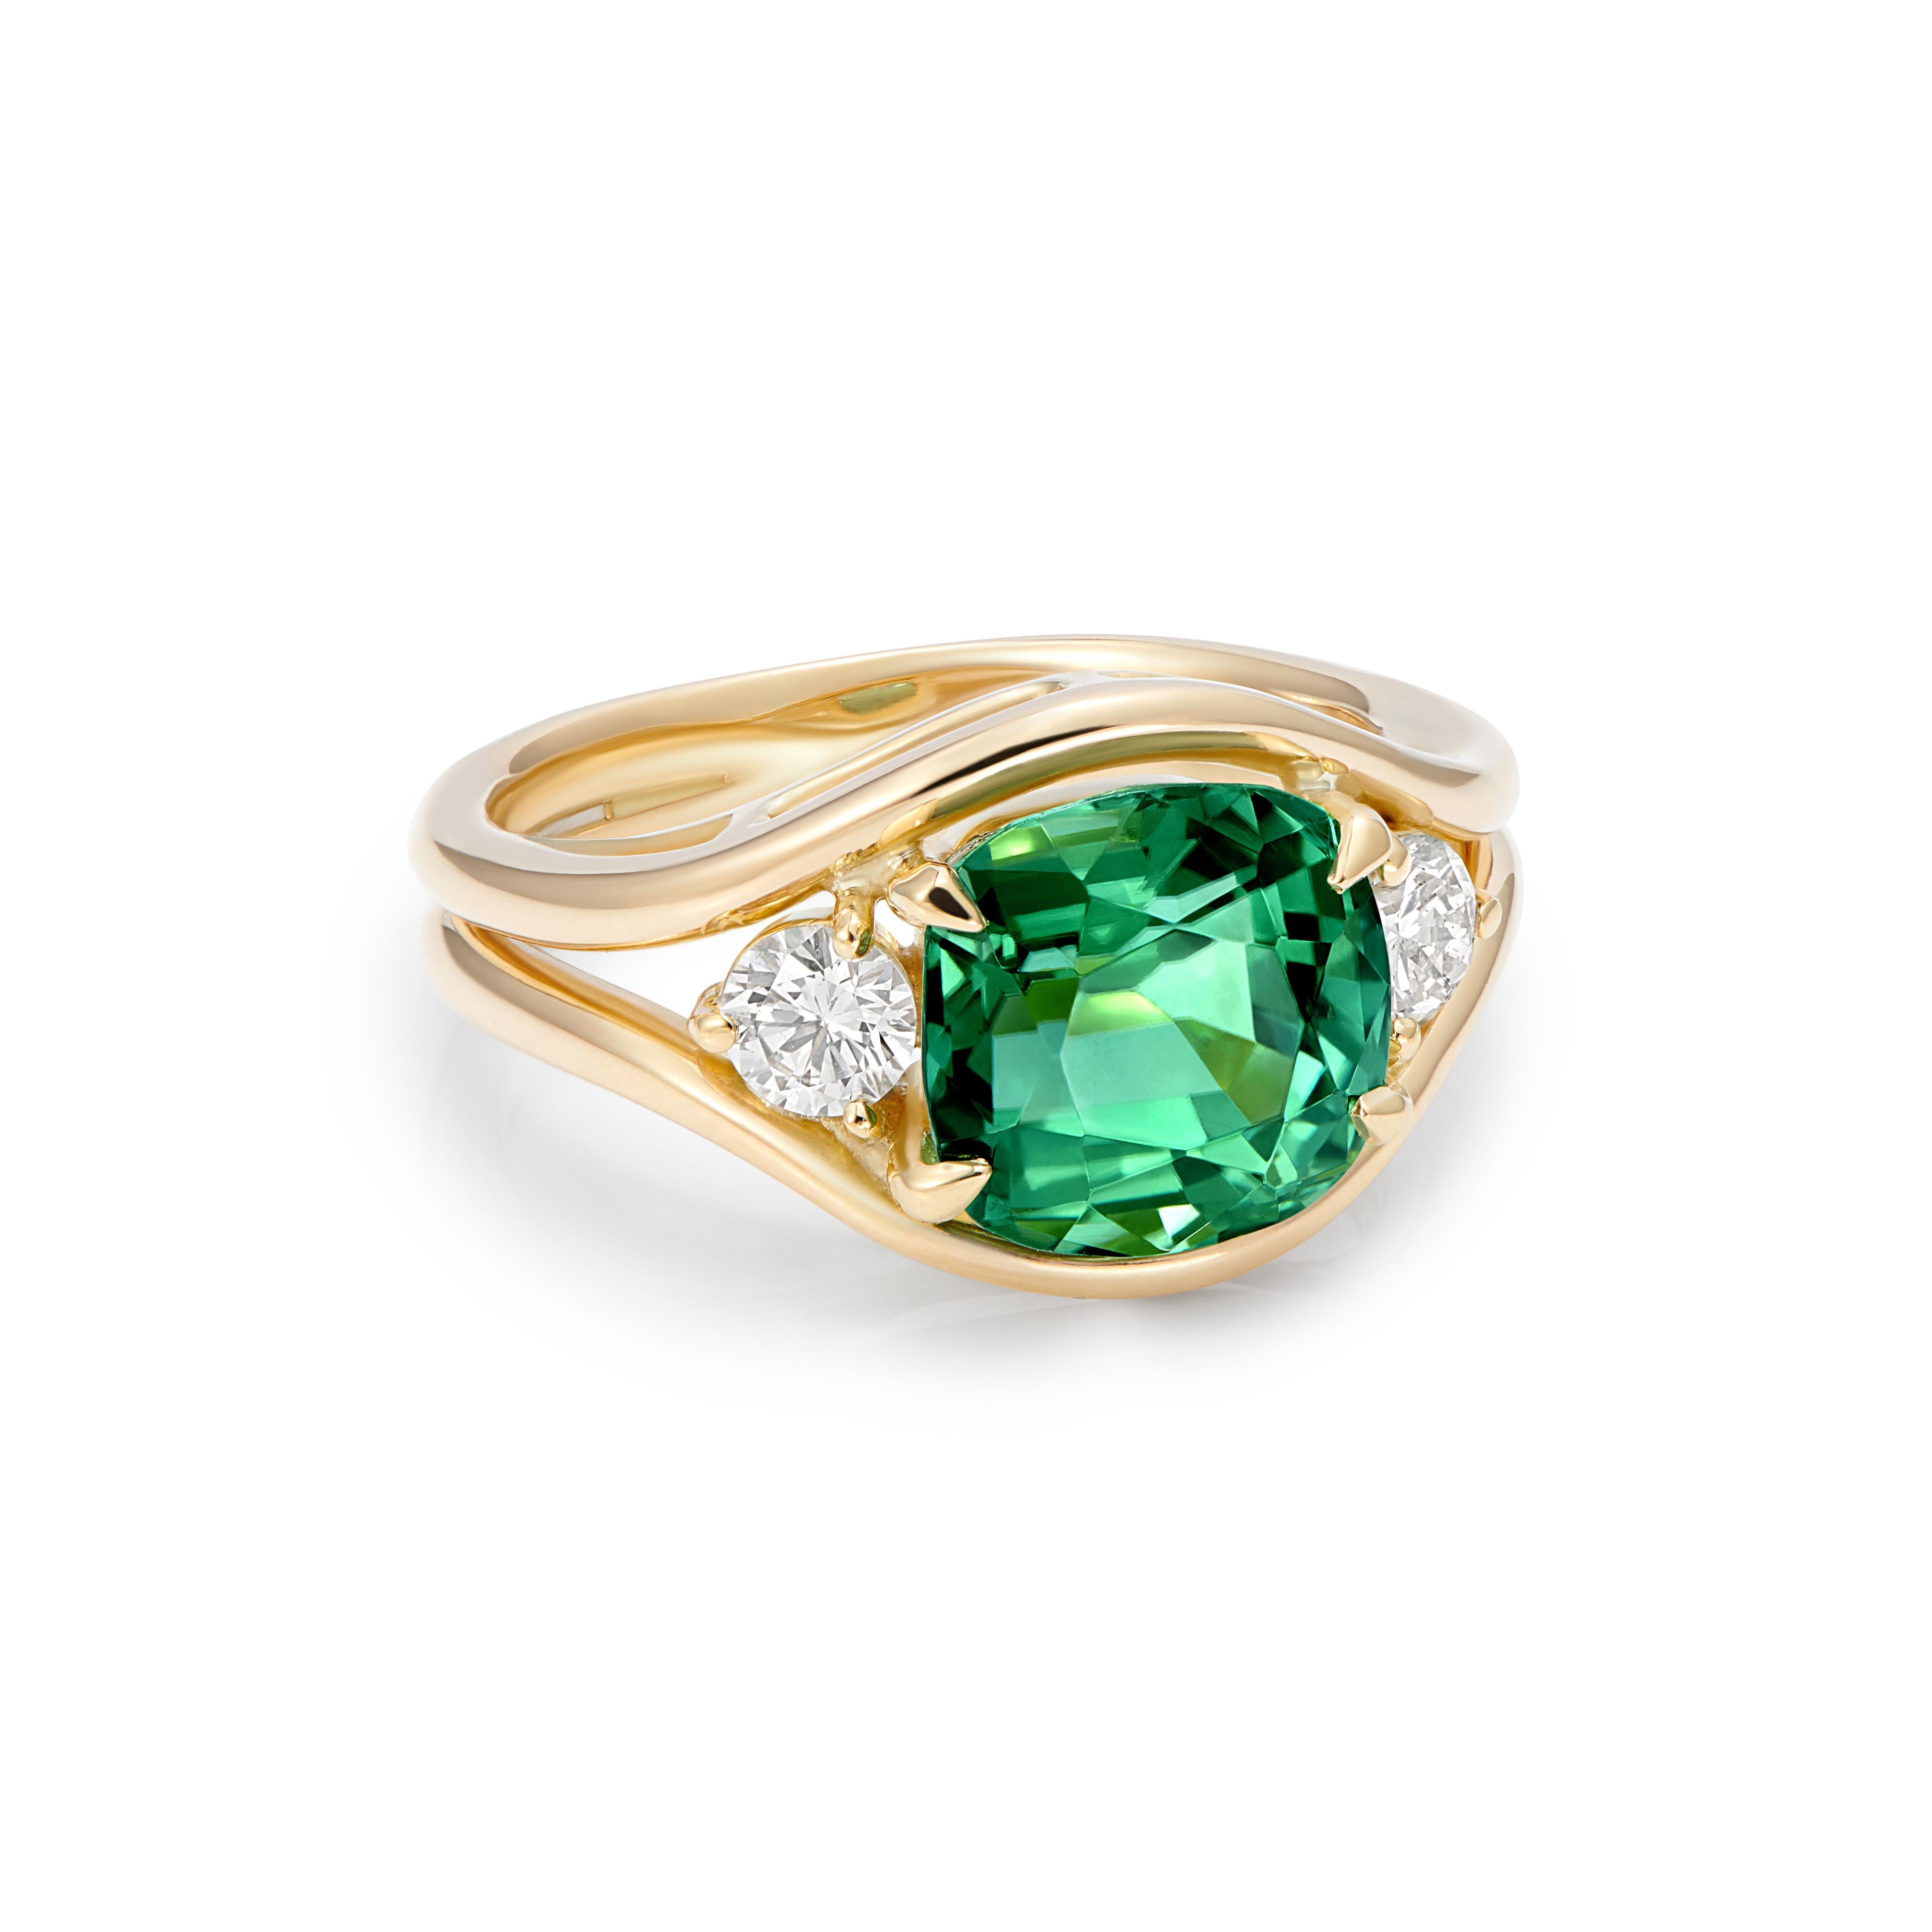 A Green Tourmaline cushion cut set with 2 round white diamonds. 
Mermaid ring, paying homage to the treasures of the sea, the Mermaid collection showcases beautiful pearls, diamonds and gorgeous ocean-coloured gemstones. This unique, one-of-a-kind